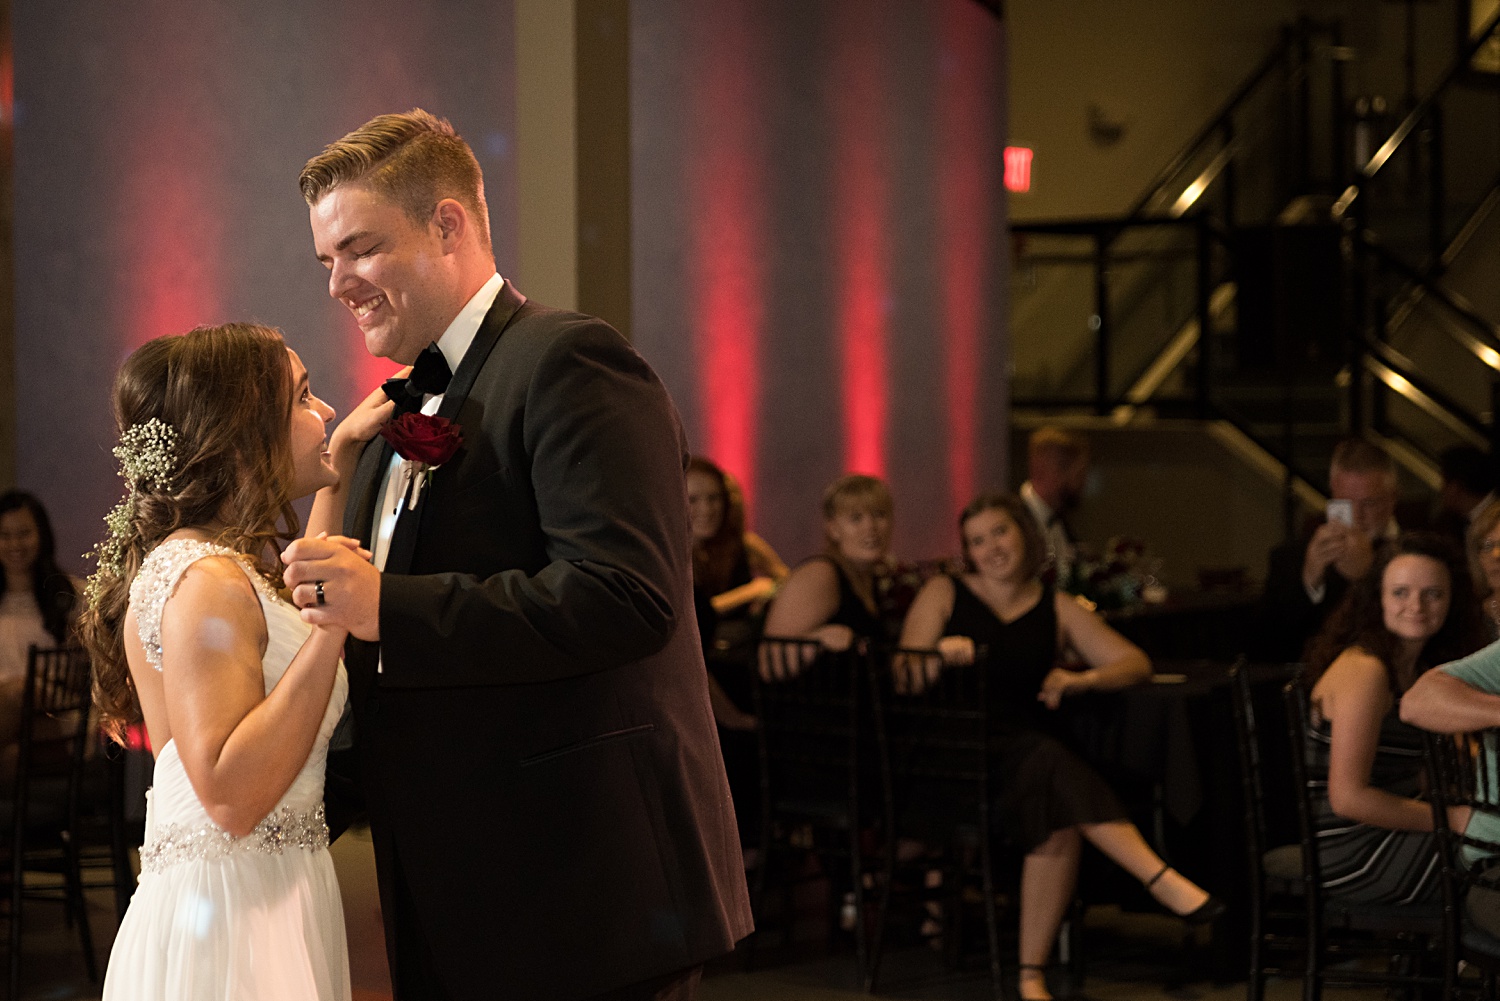 First dance photo, Wedding reception photos at Maceli's in Lawrence, KS